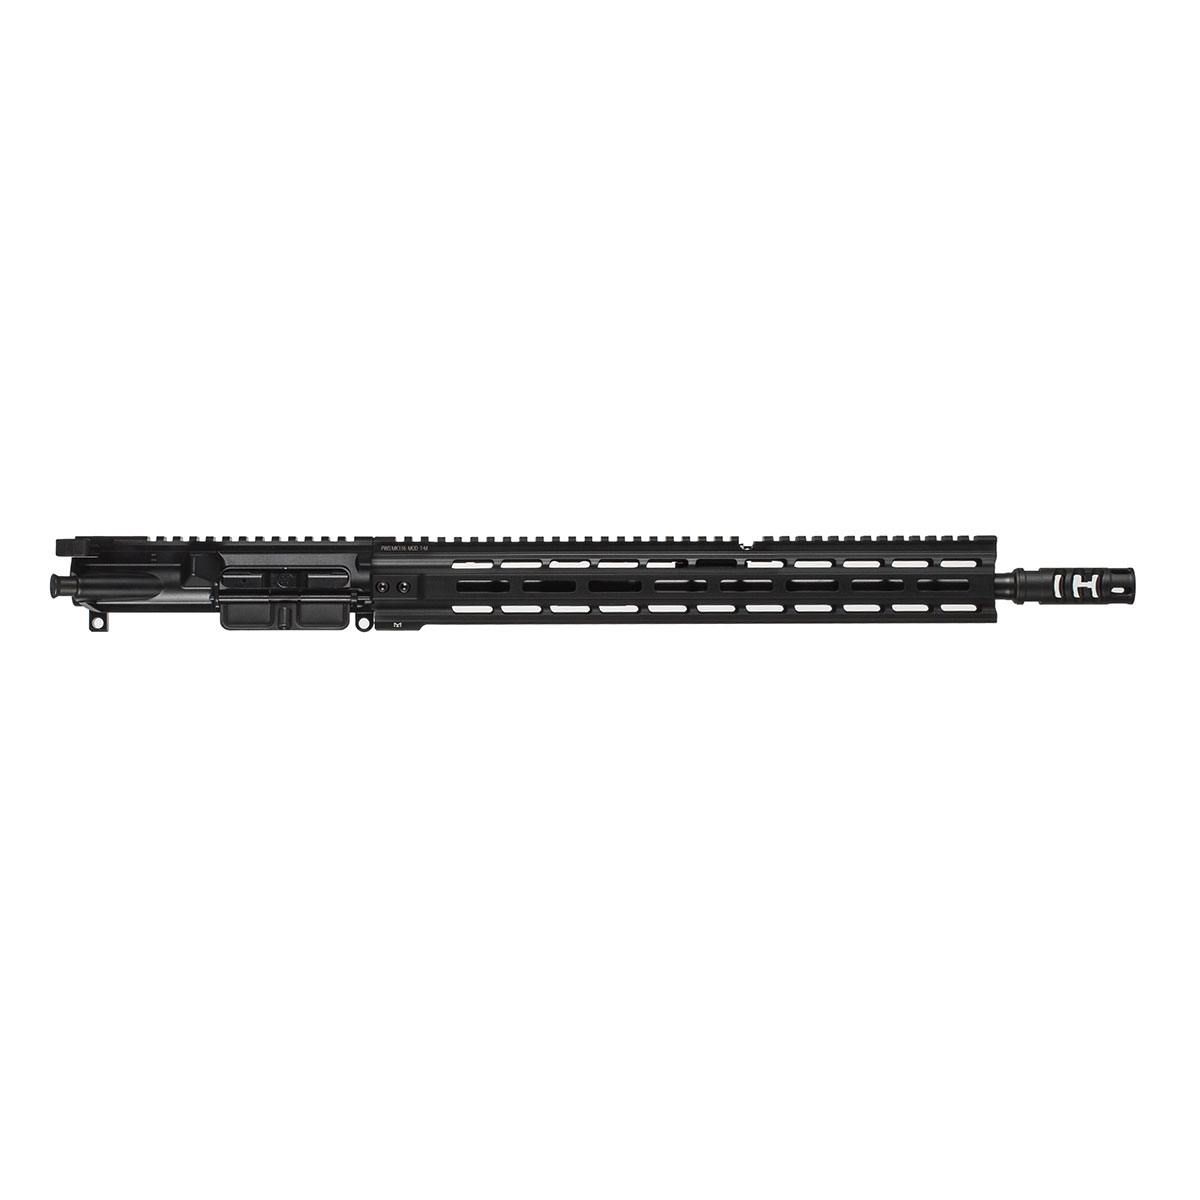 PRIMARY WEAPONS - MK116 MOD 1-M 7.62X39MM COMPLETE UPPER RECEIVER